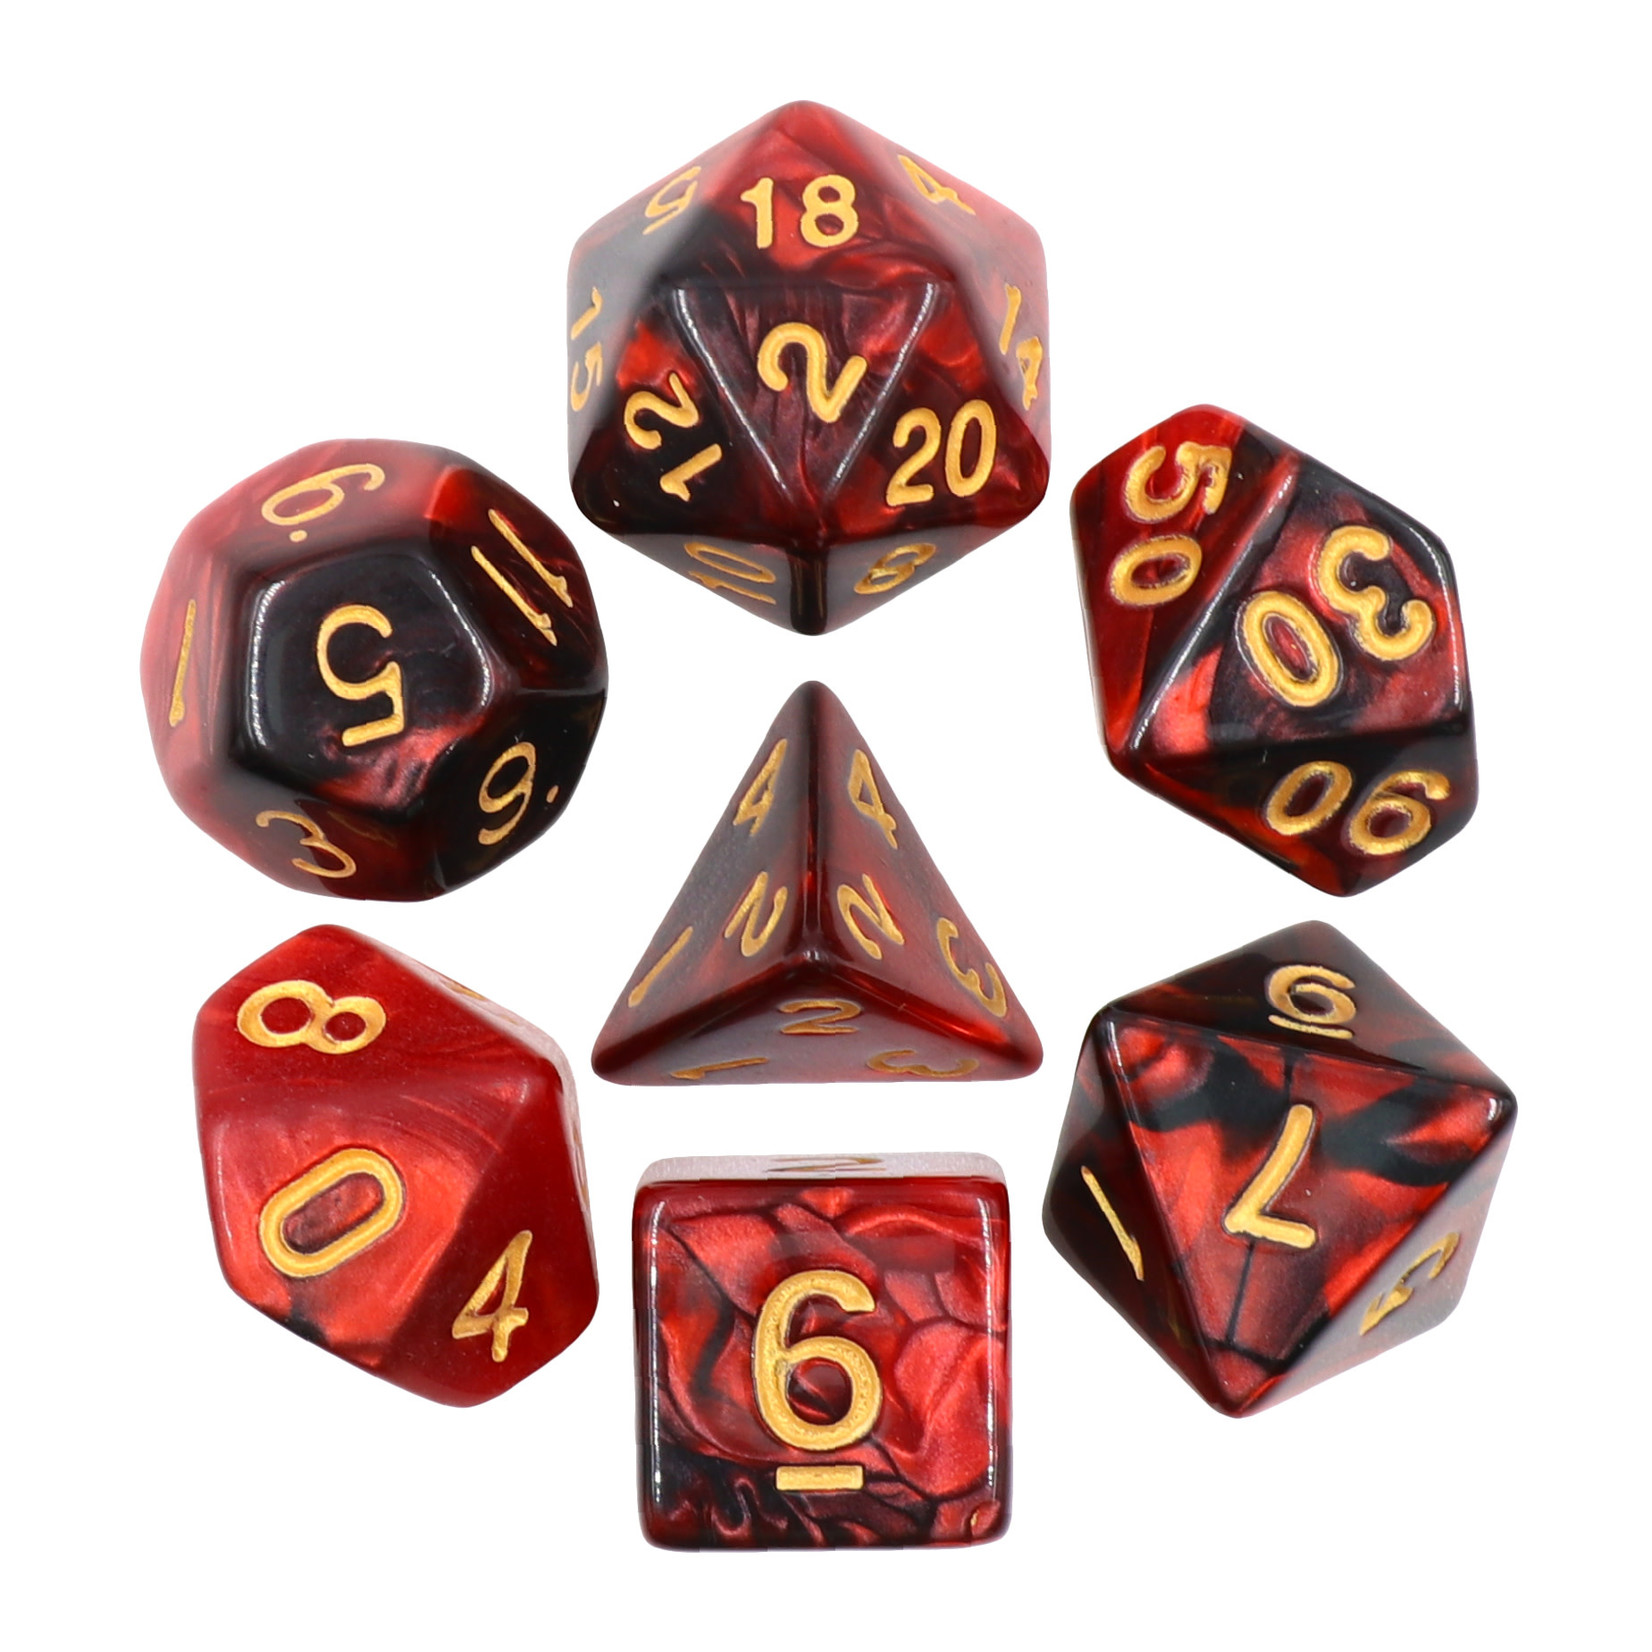 7 Set Polyhedral Dice - Black/Red Pearl Gold Font